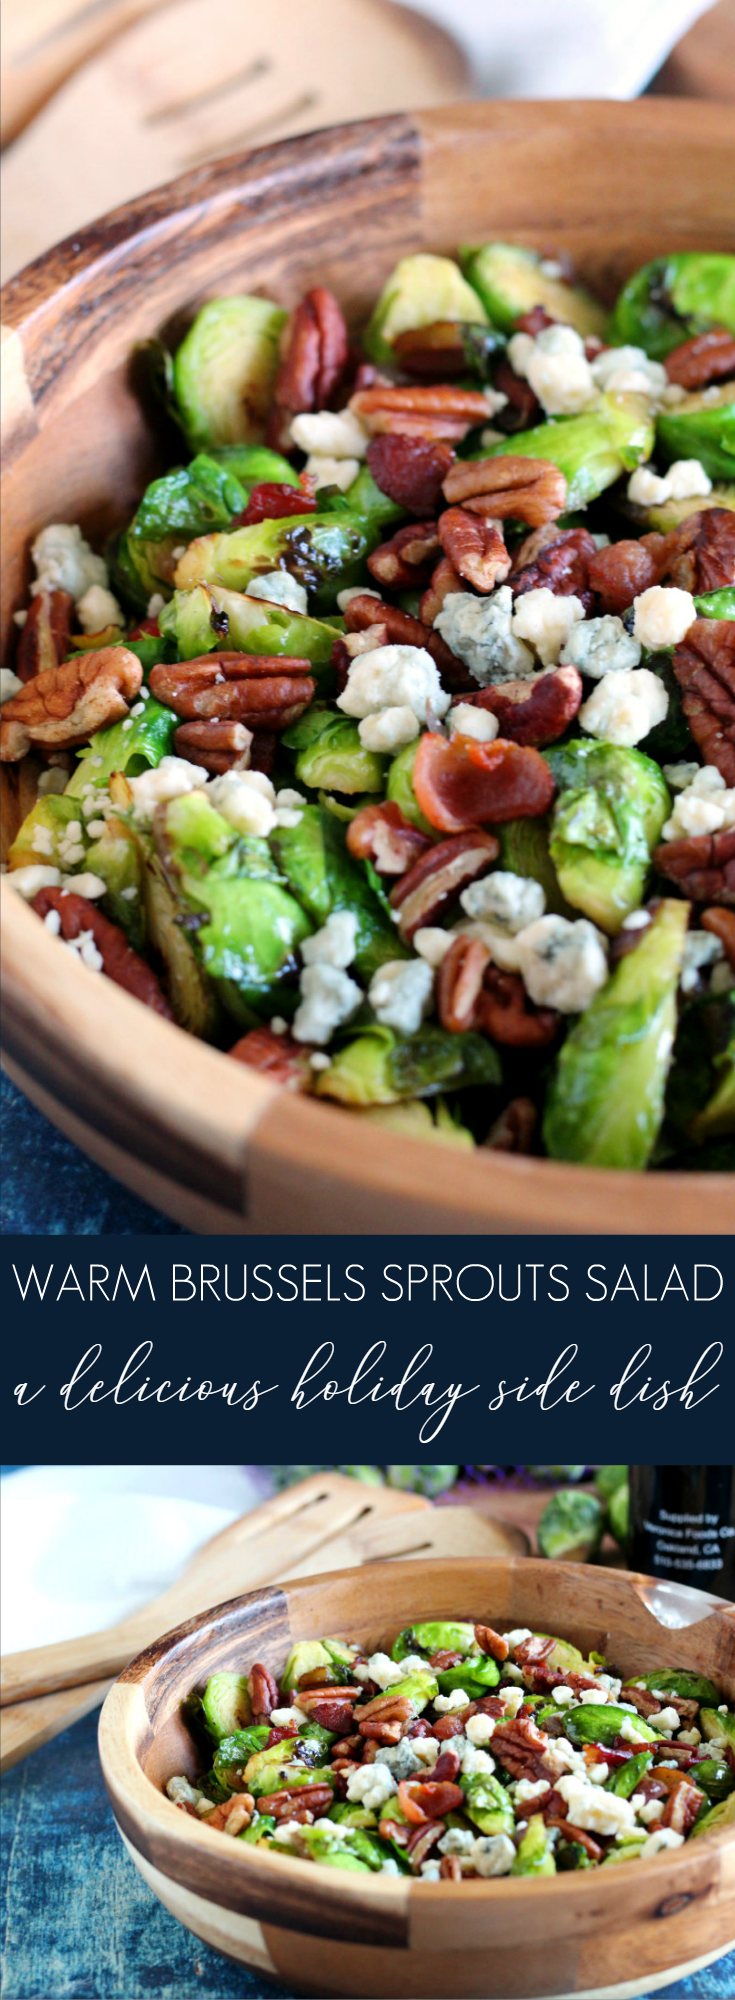 Warm Brussels Sprouts Salad is the perfect portable side dish for an office potluck or family feast. Seasonal produce is served with bacon, blue cheese, and pecans. A unique side dish to liven up the holiday dinner menu.